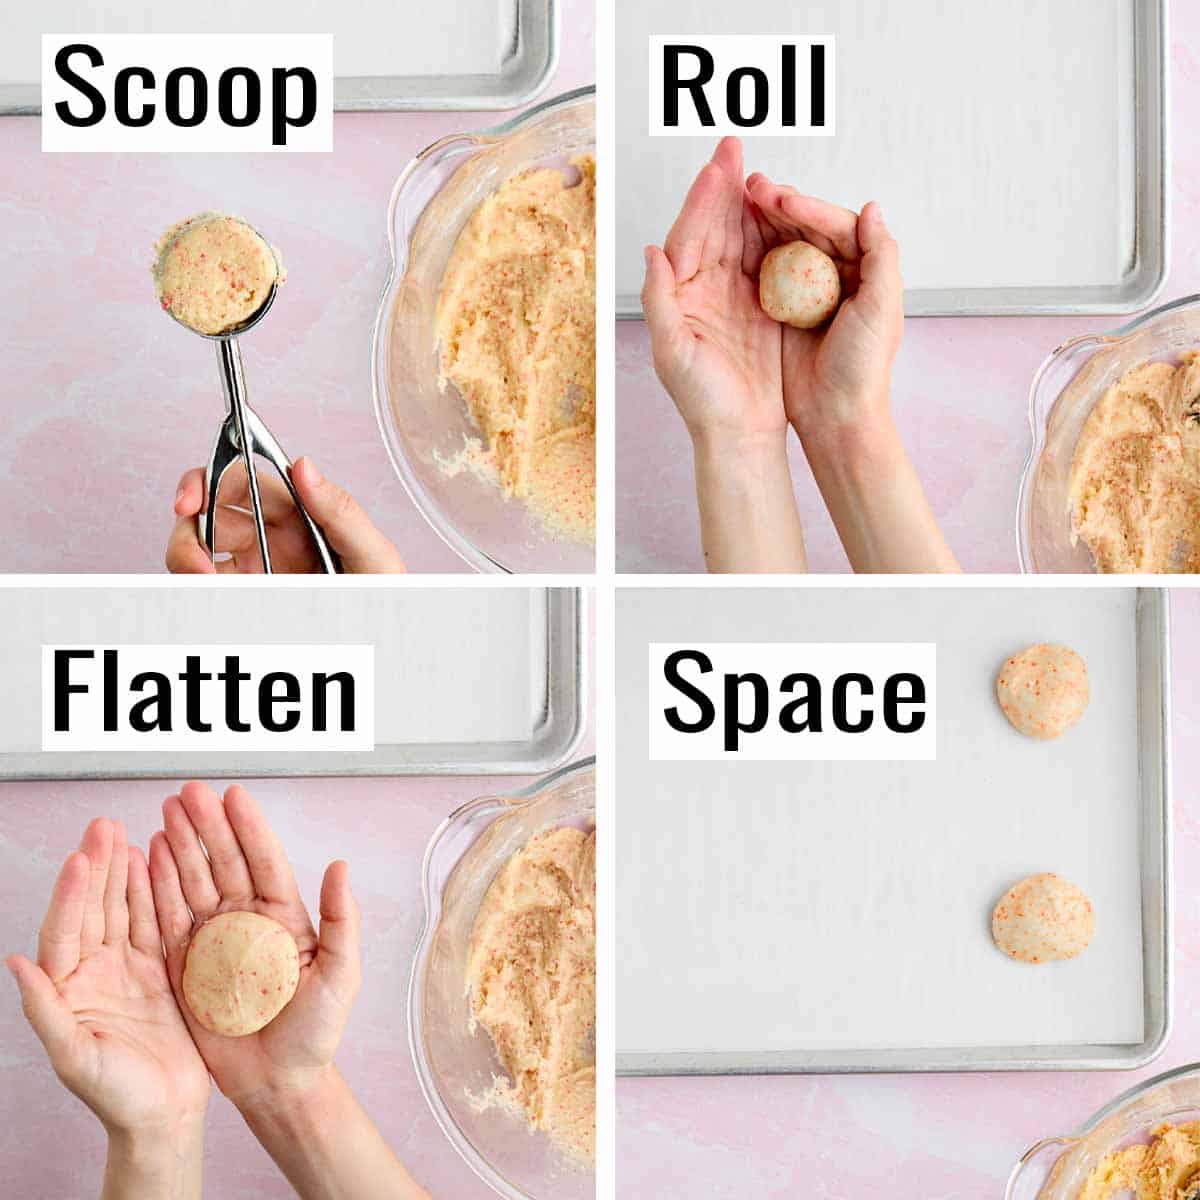 Step-by-step showing scooping the cookie dough, rolling it in a ball, slightly flattening it, and spacing them 2 inches apart on a cookie sheet.